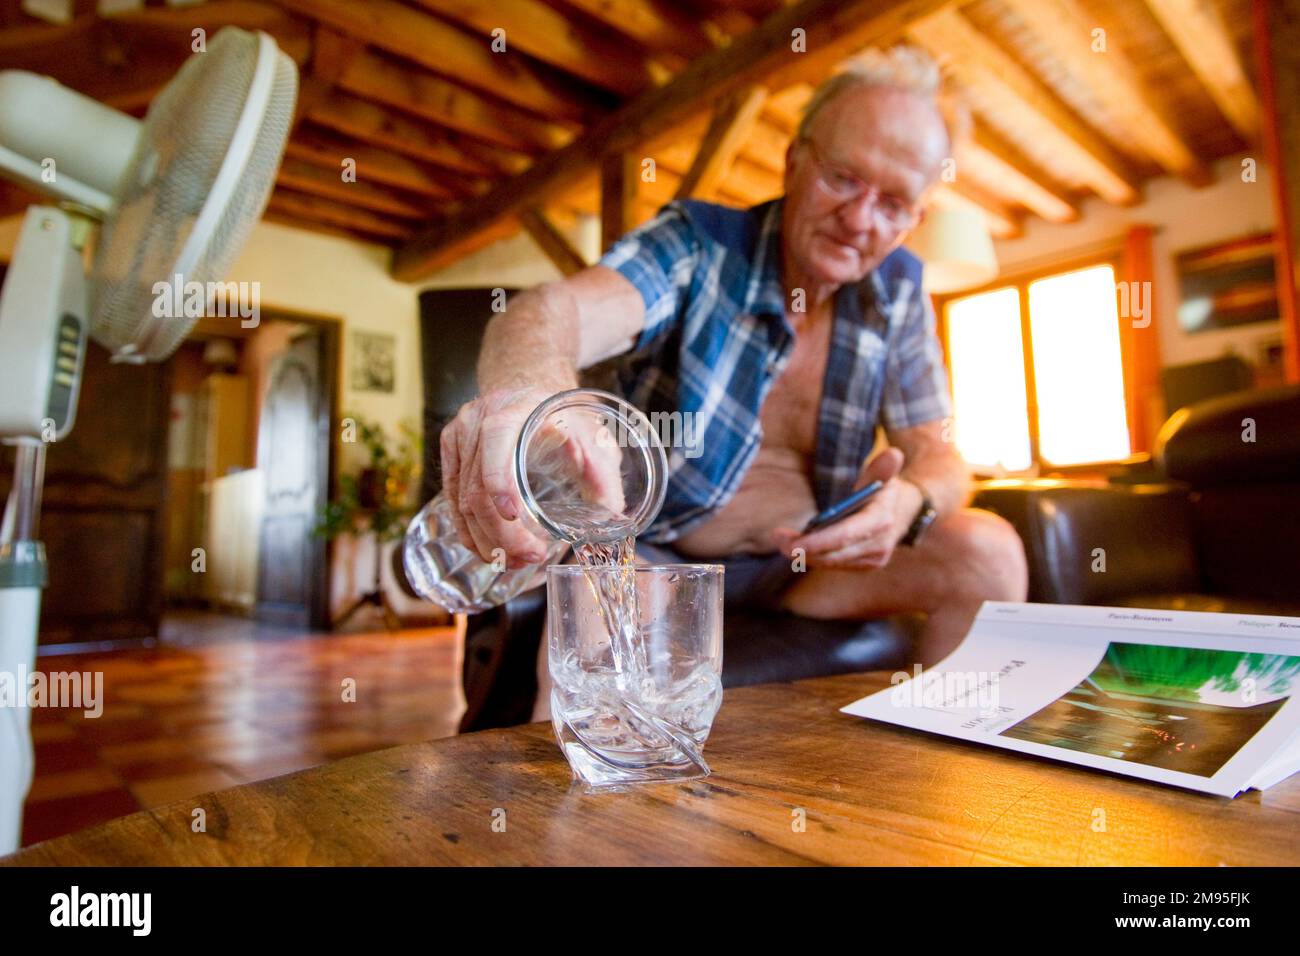 Senior citizens and heat wave: staying hydrated. Intense heat: old man drinking water and fan blowing air. Illustration, elderly people and hydration, Stock Photo